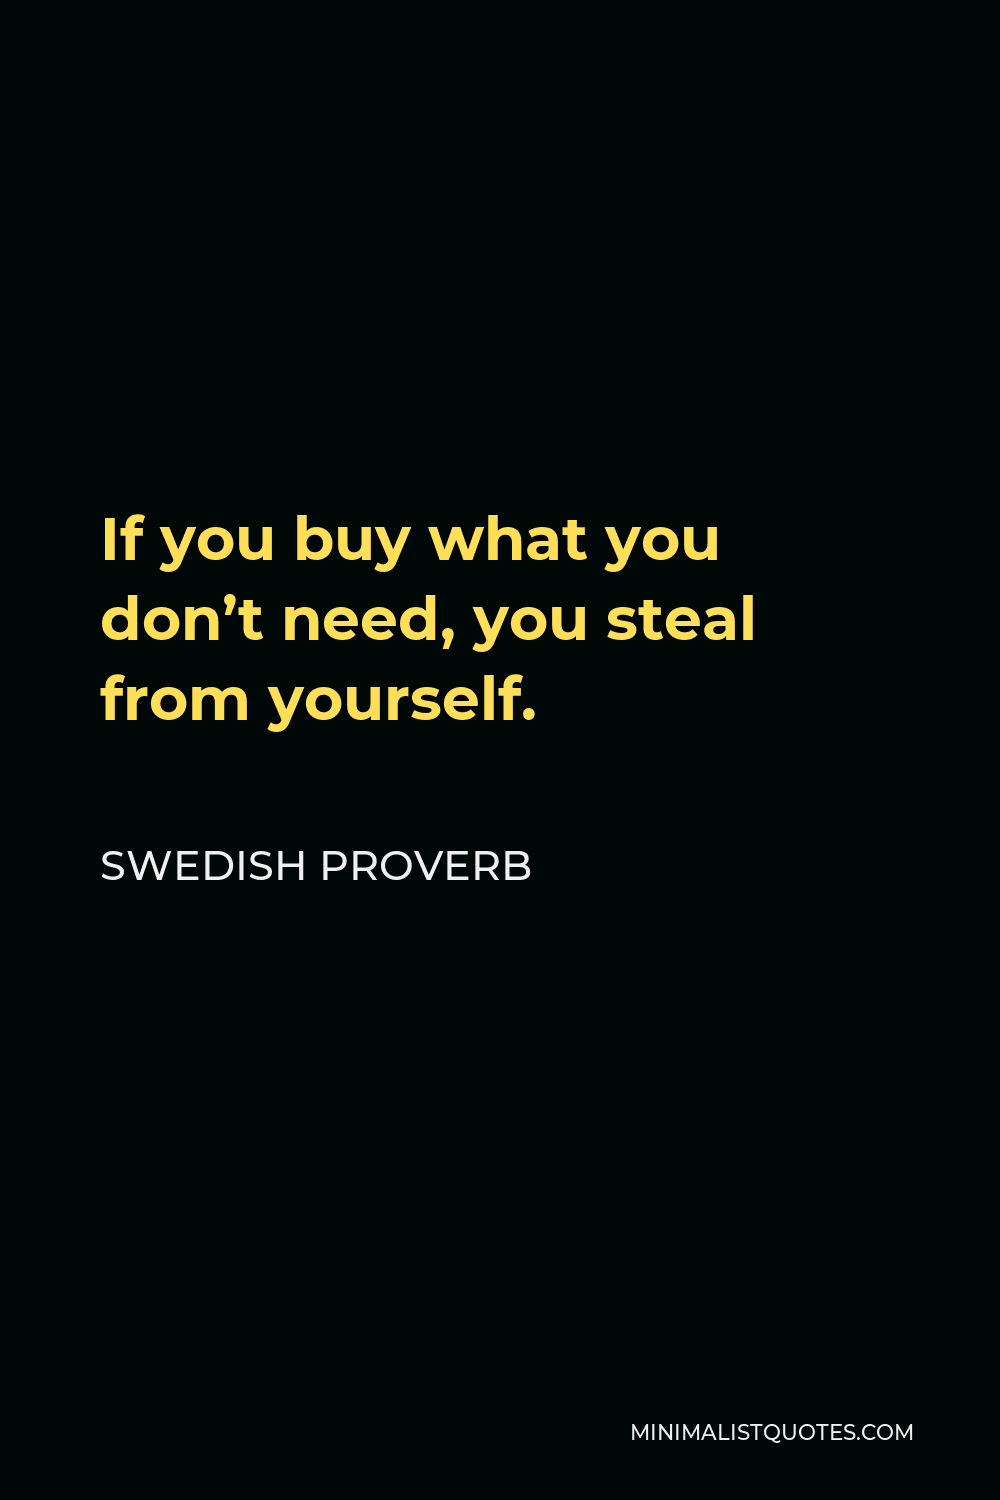 Swedish Proverb Quote - If you buy what you don’t need, you steal from yourself.